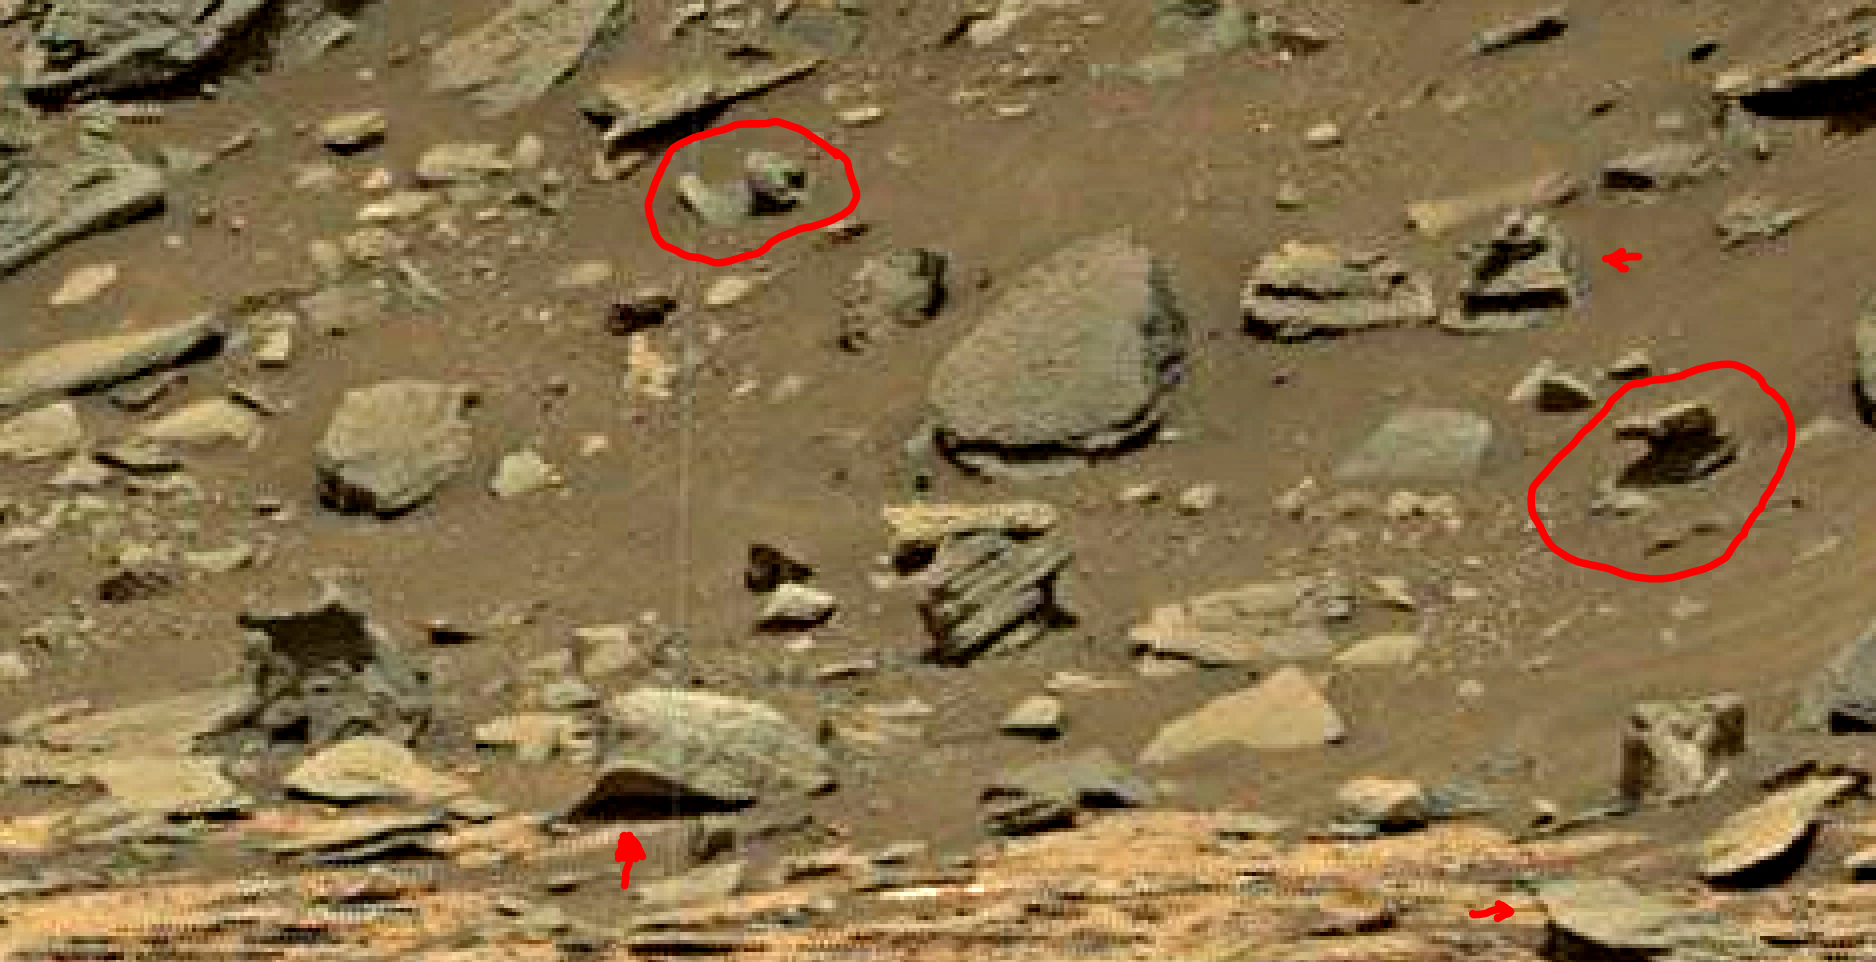 mars-sol-1455-anomaly-artifacts-3a-was-life-on-mars